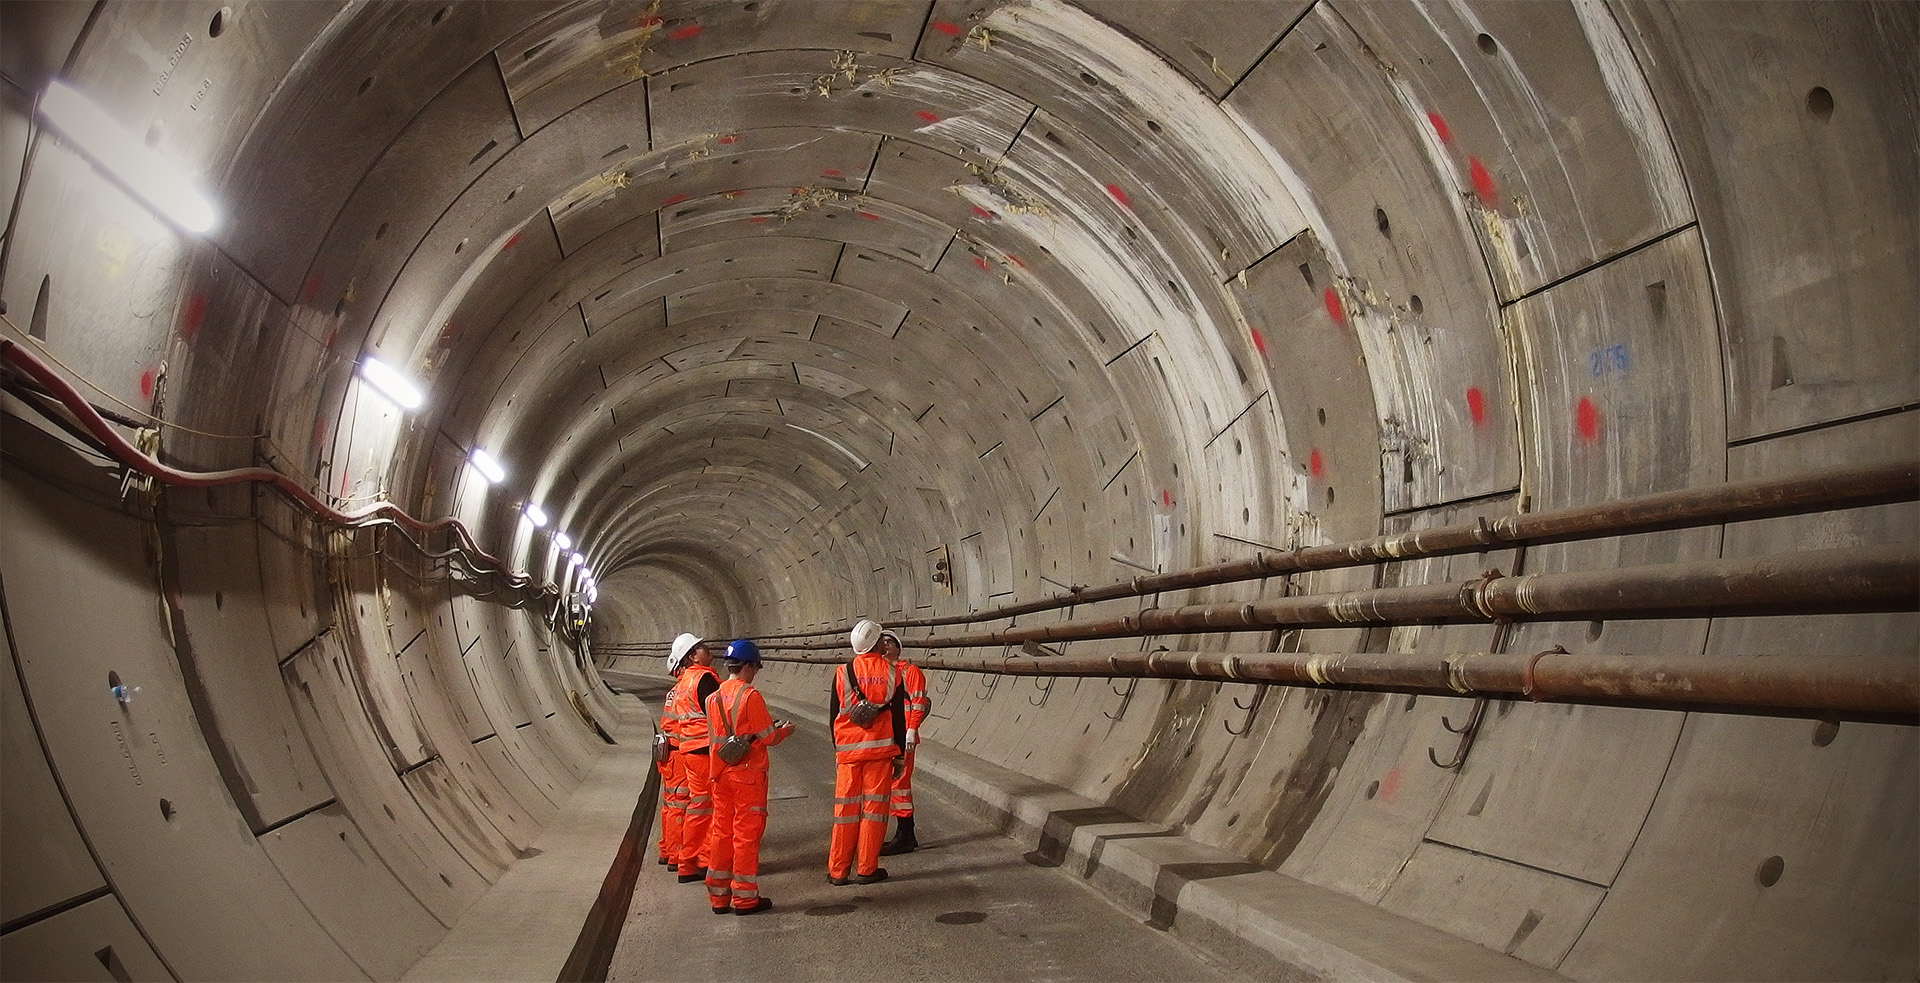 A group of people in orange inspect a tunnel's roof